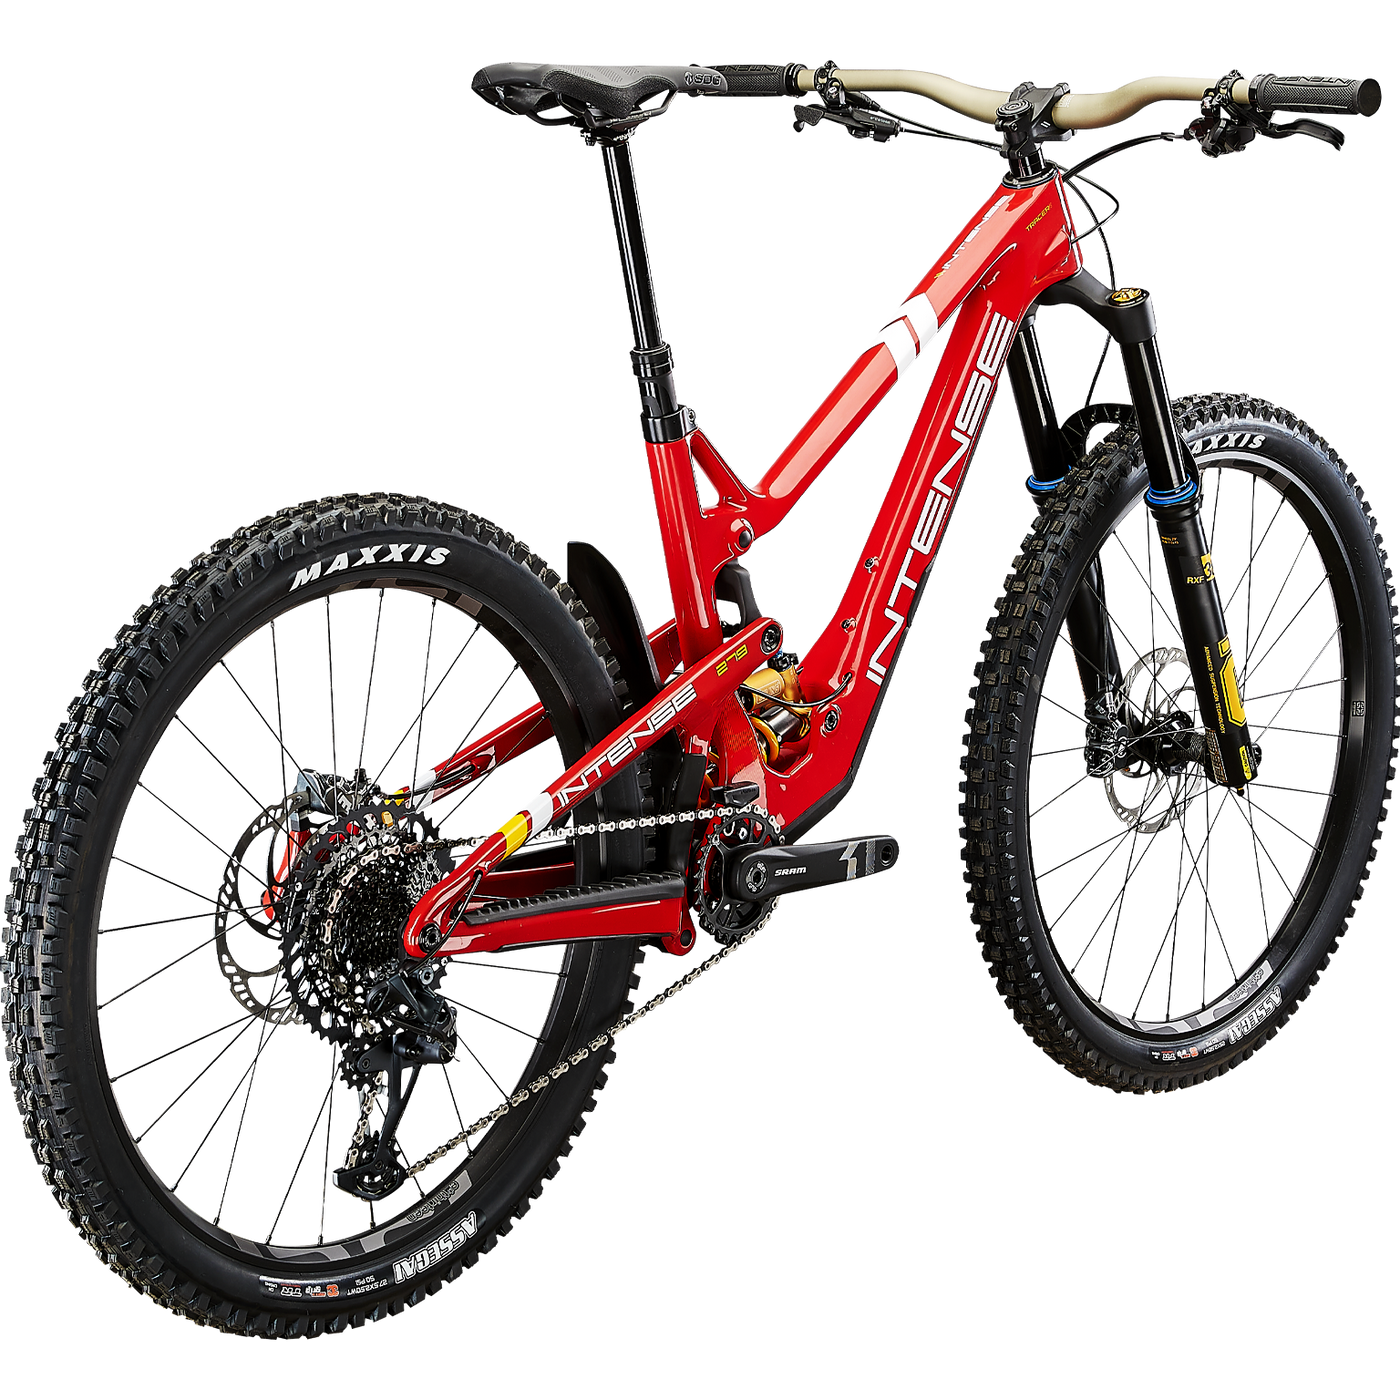 Shop online for the INTENSE Tracer S Carbon Enduro Mountain Bike for sale online or at authorized dealers